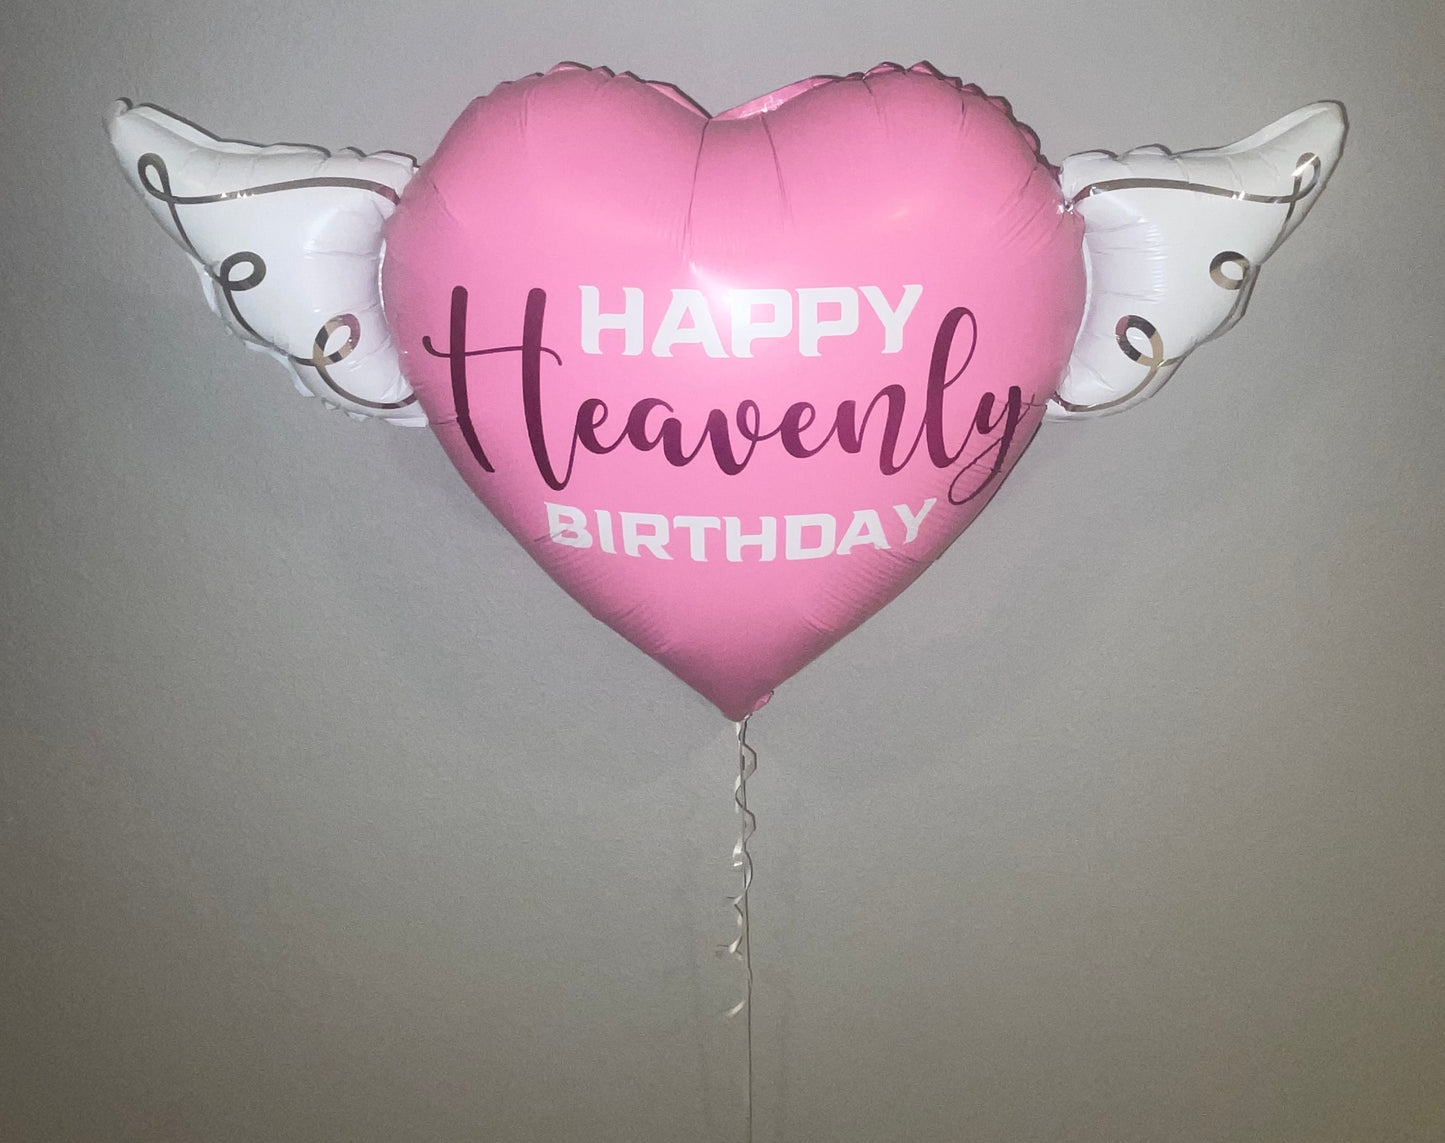 Happy Heavenly Birthday pink/purple heart shaped balloon with angel wings